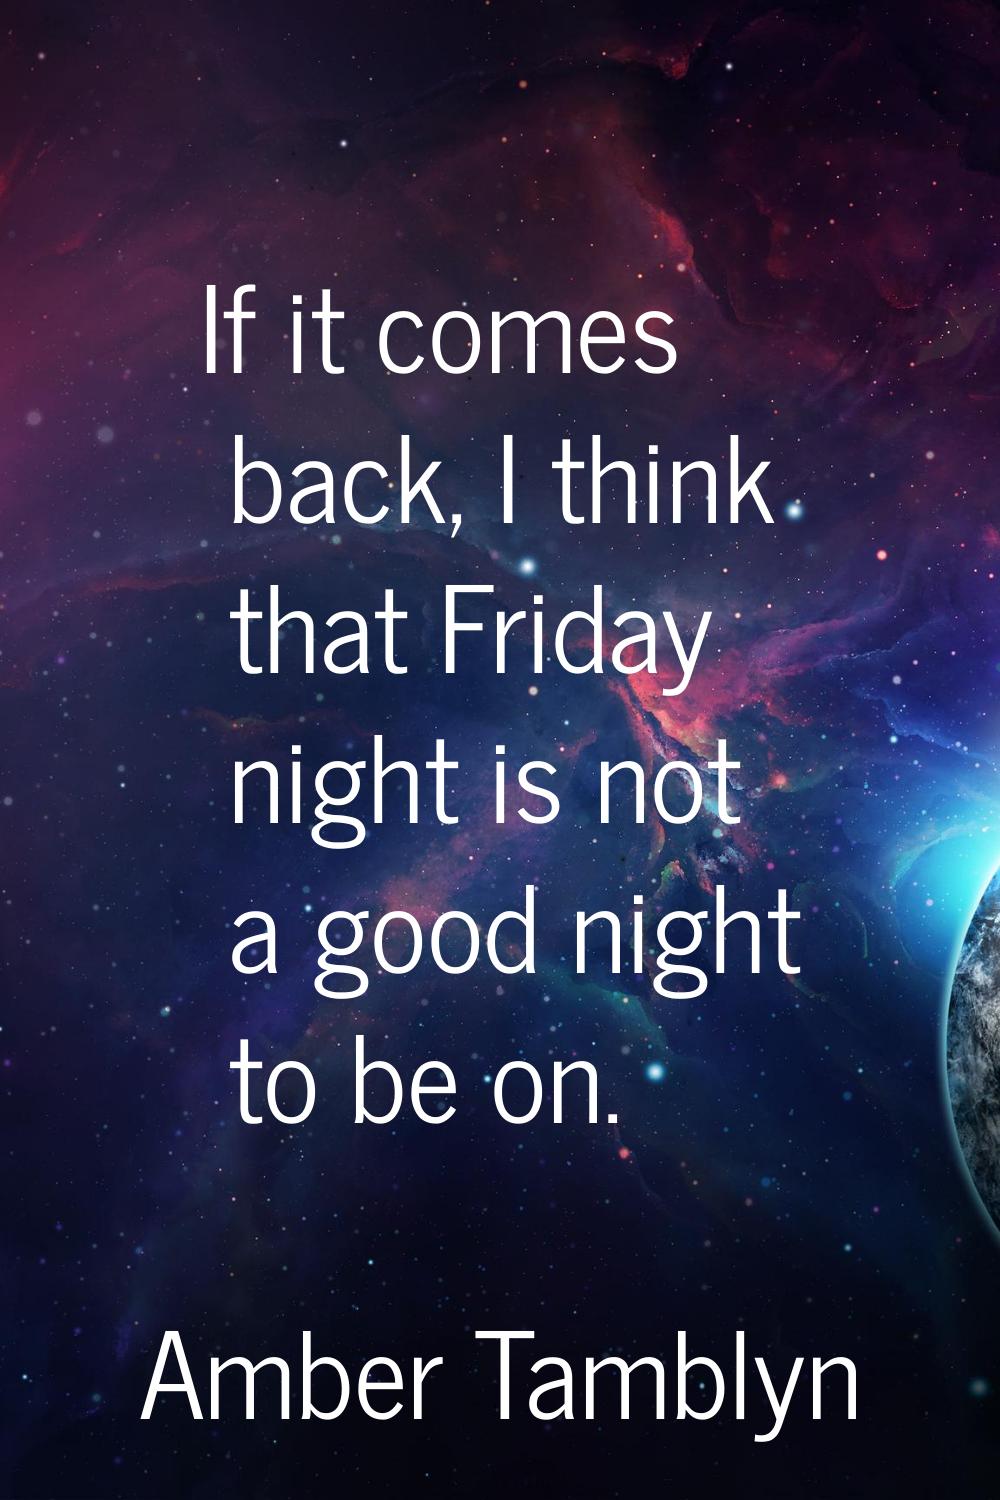 If it comes back, I think that Friday night is not a good night to be on.